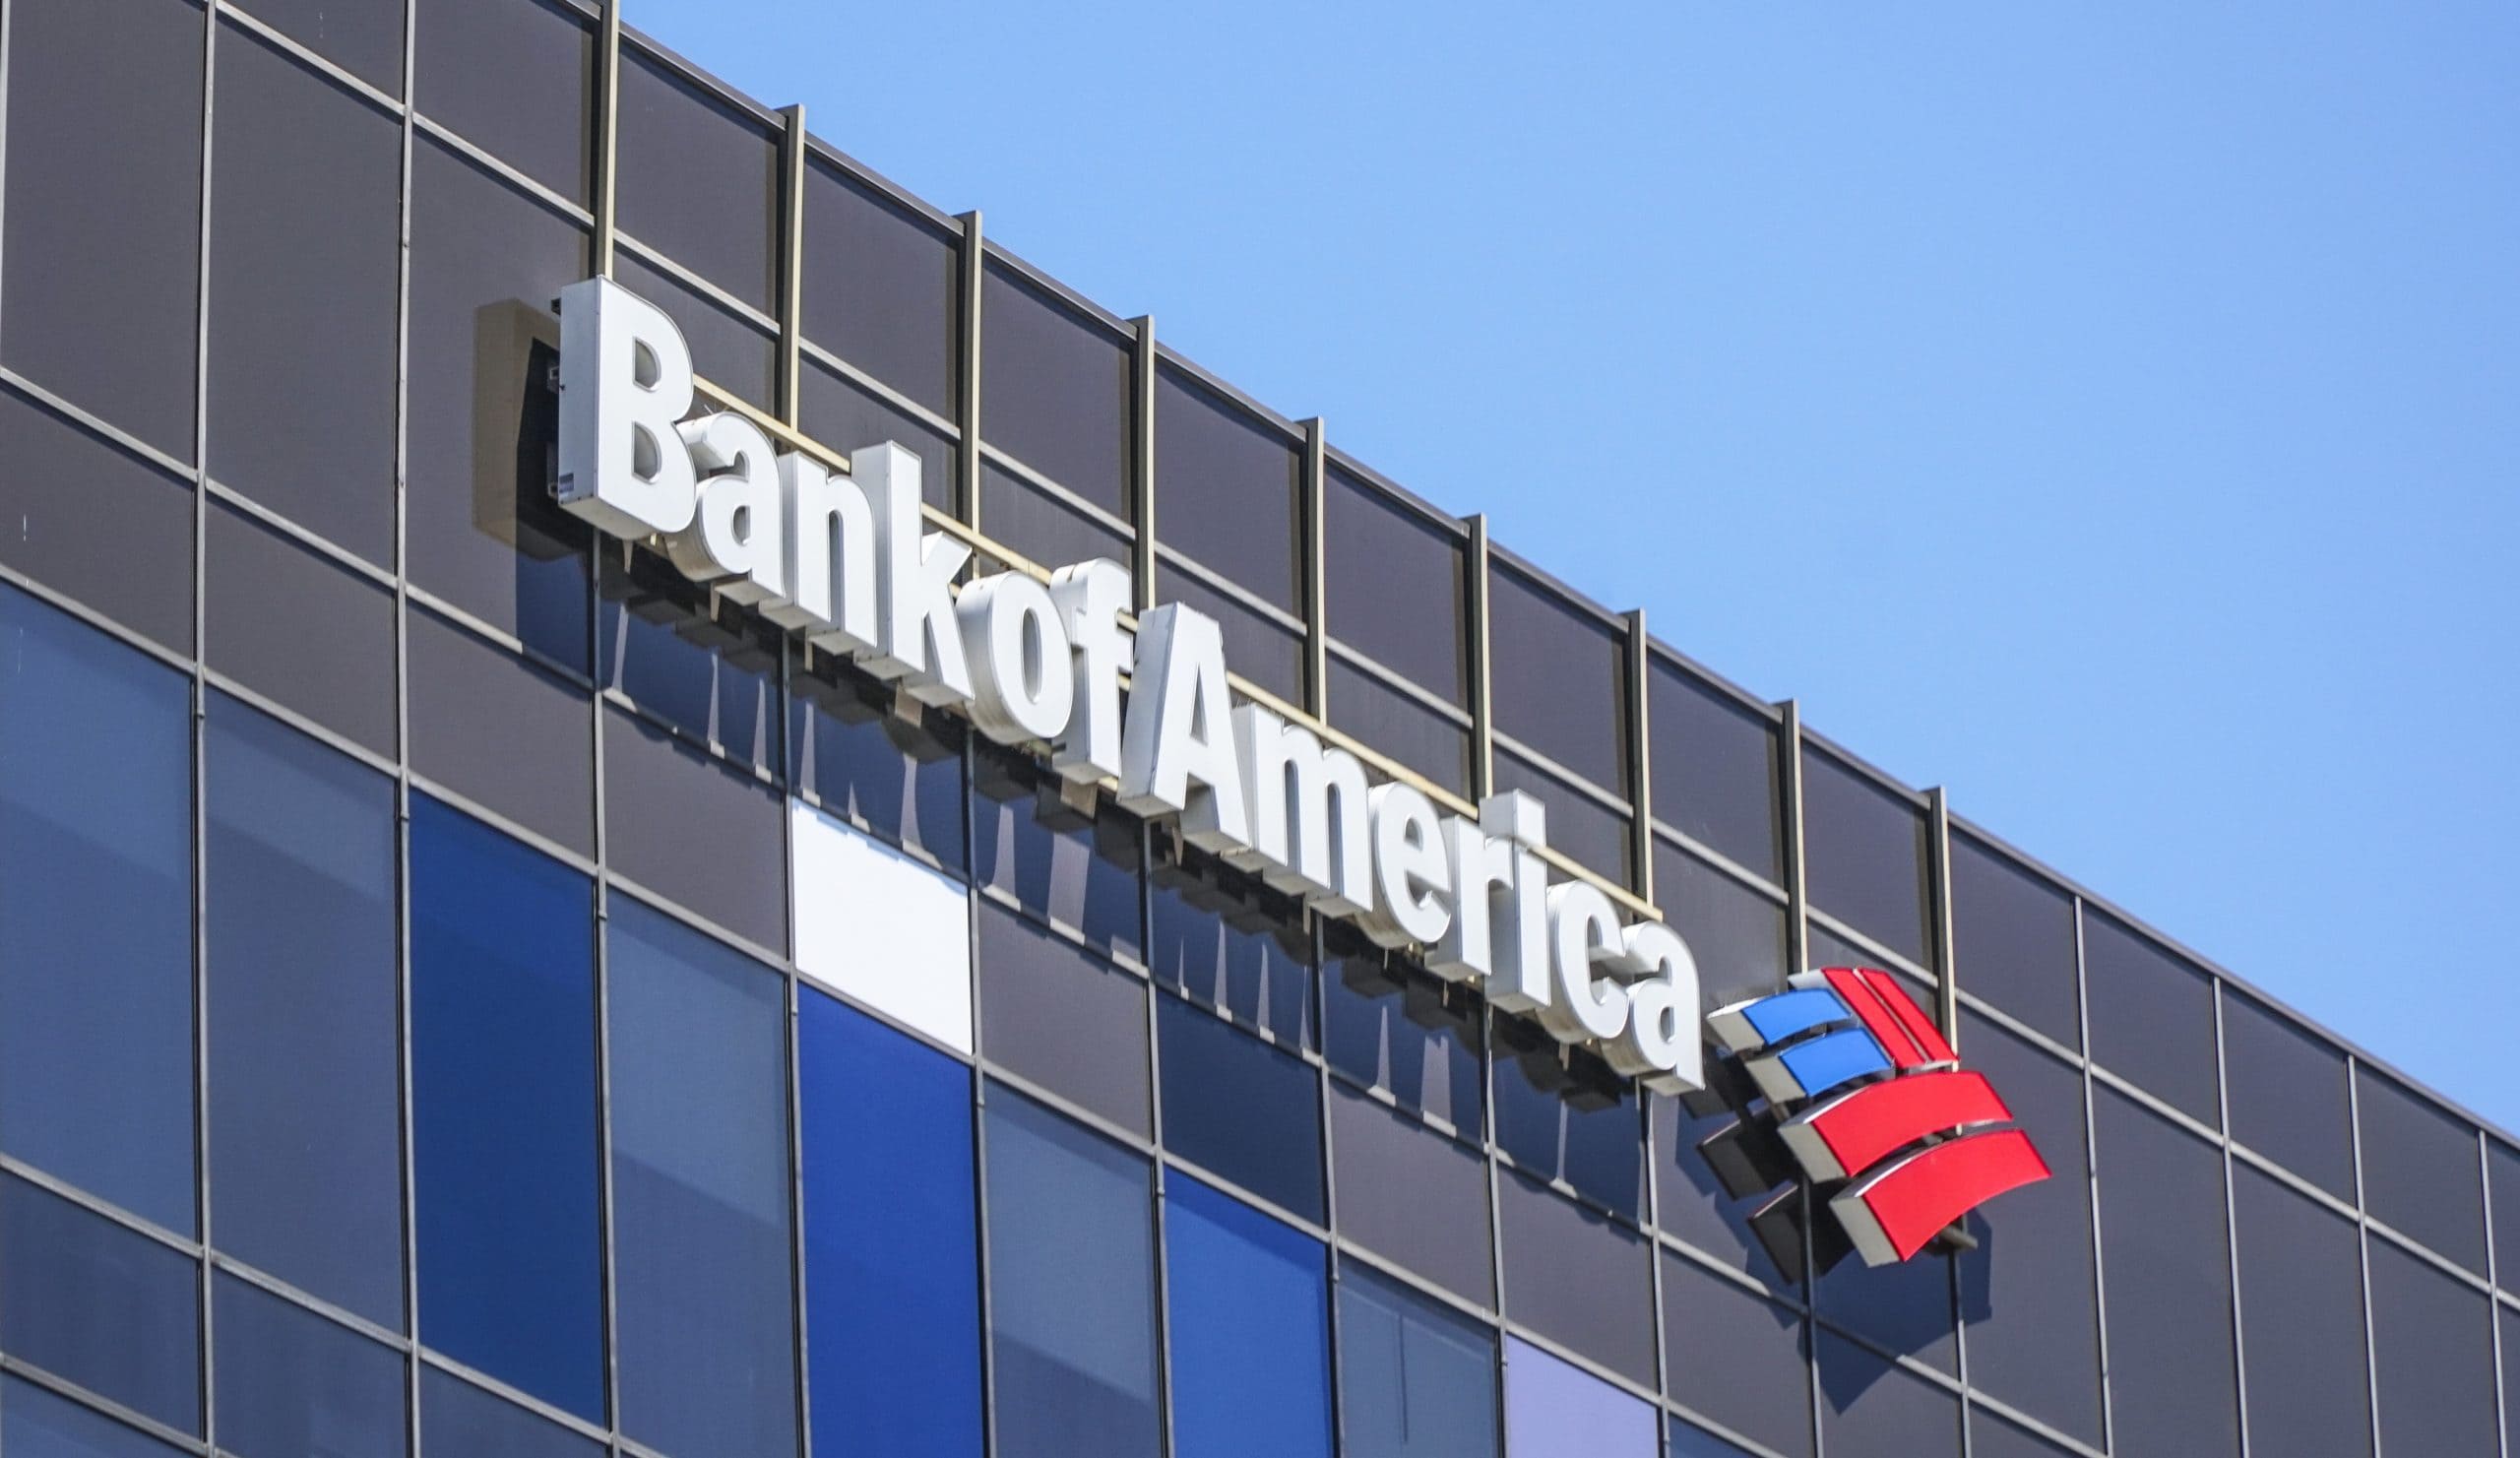 Metaverse has huge potential for crypto, according to Bank of America